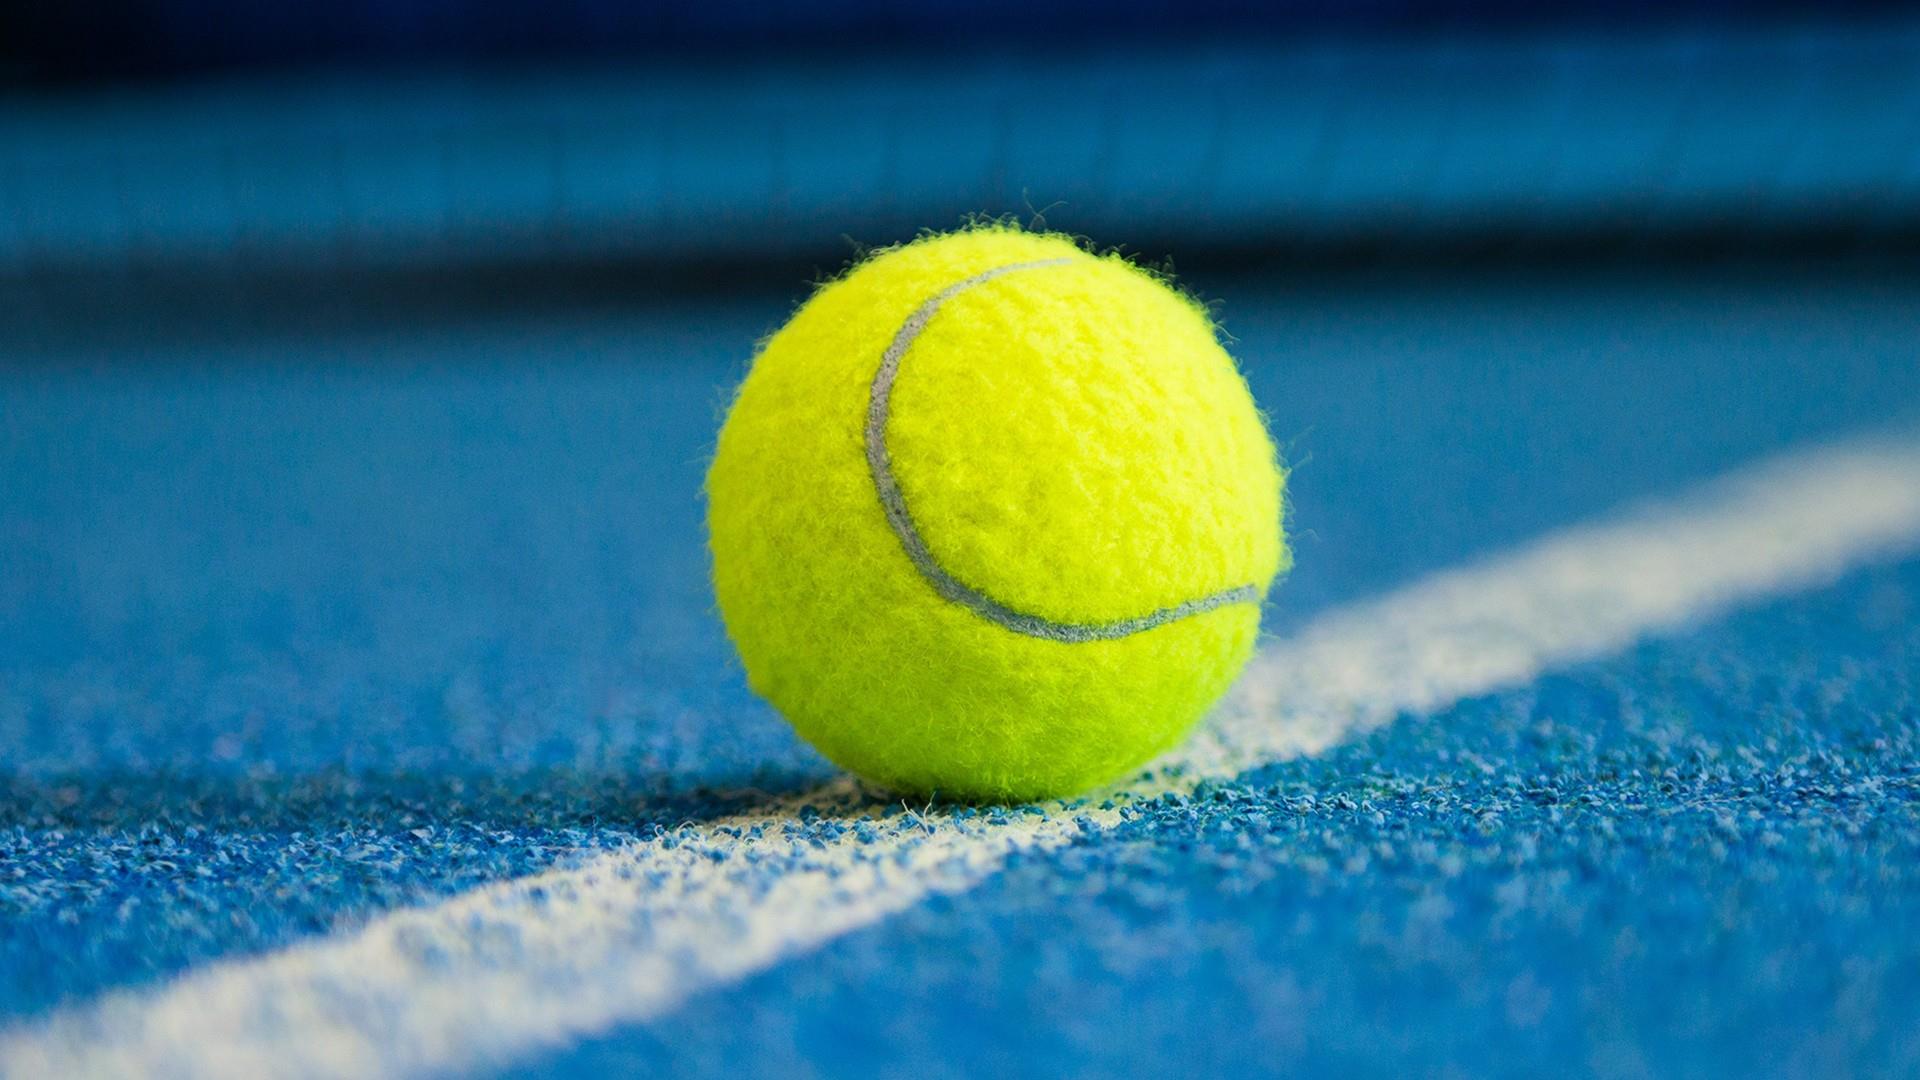 The latest internet debate: What color is a tennis ball? - TODAY.com